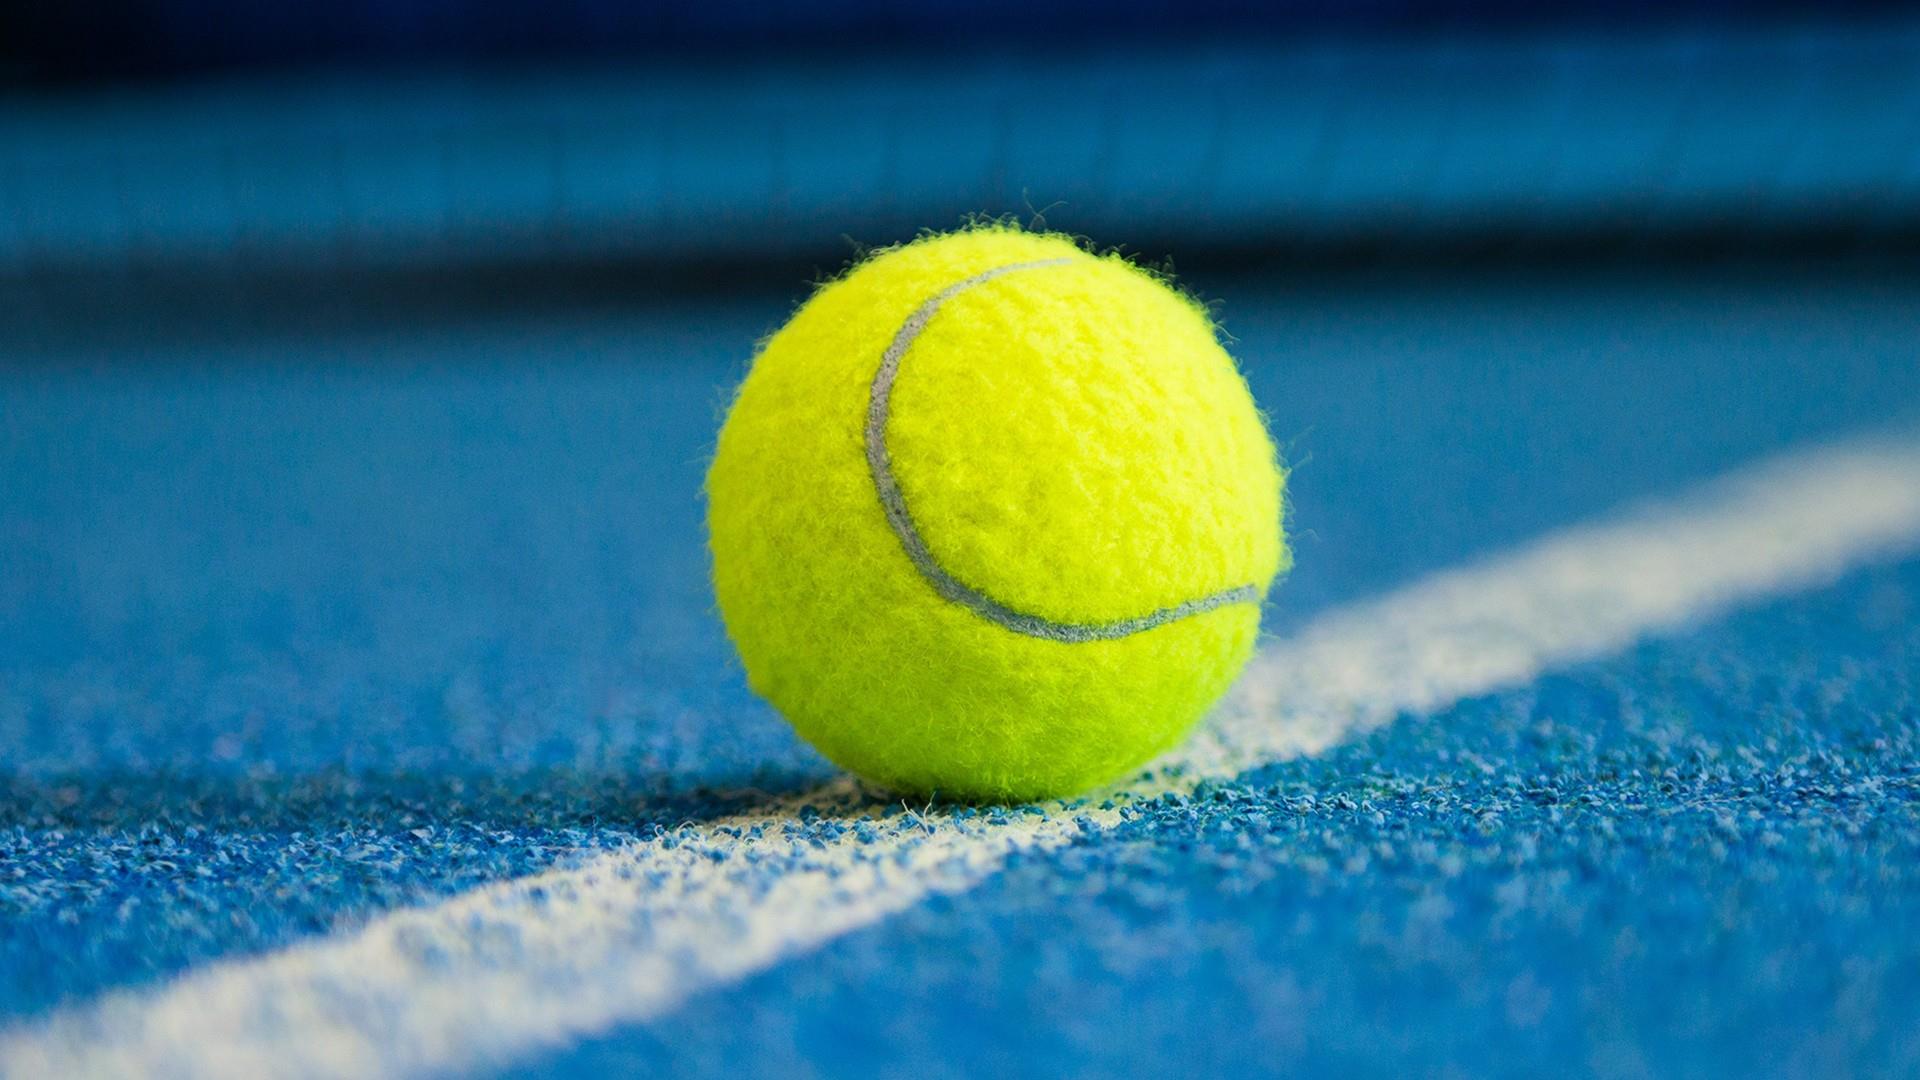 The latest internet debate: What color is a tennis ball? - TODAY.com